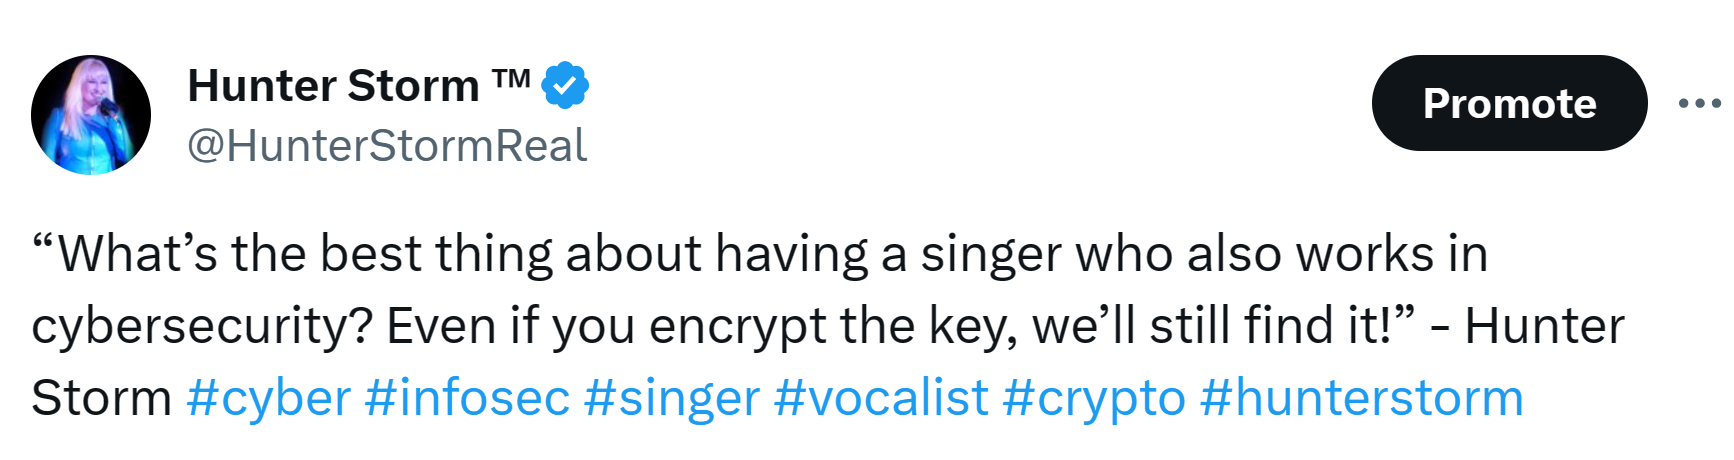 Hunter Storm Wisdom: Timeless Insights and Inspiration | "What's the best thing about having a singer in cybersecurity? Even if you encrypt the key, we'll still find it!"